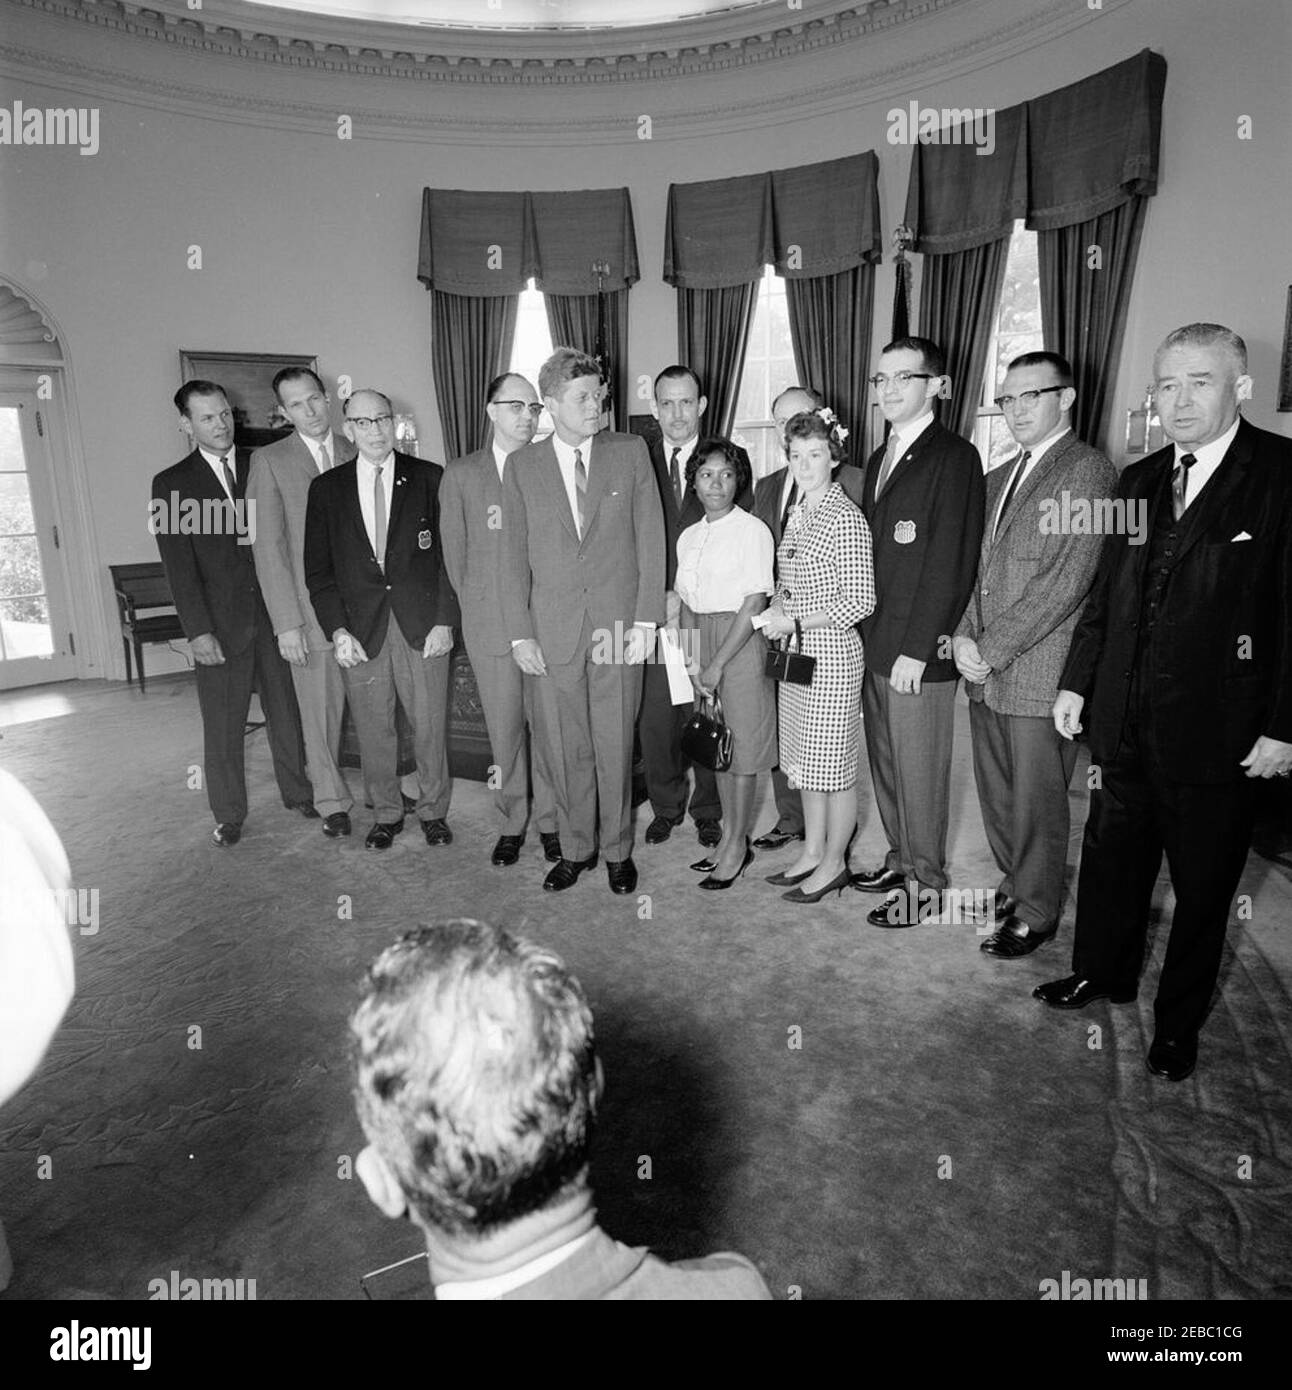 Visit of representatives of the 10th International Games for the Deaf, 10:05AM. President John F. Kennedy visits with representatives of the 10th International Games for the Deaf, sponsored by the American Athletic Association of the Deaf (AAAD). The Games were to be held in Washington, D.C., in 1965. Left to right: Director, Thomas O. Berg; Liaison Officer, Richard M. Phillips; Chairman Emeritus, S. Robey Burns; Chairman, Jerald M. Jordan; President Kennedy; Assistant Chairman, Leon Auerbach; athlete, Mary Lynch; Local Chairman and AAAD President, Alexander Fleischman (partially obscured); at Stock Photo